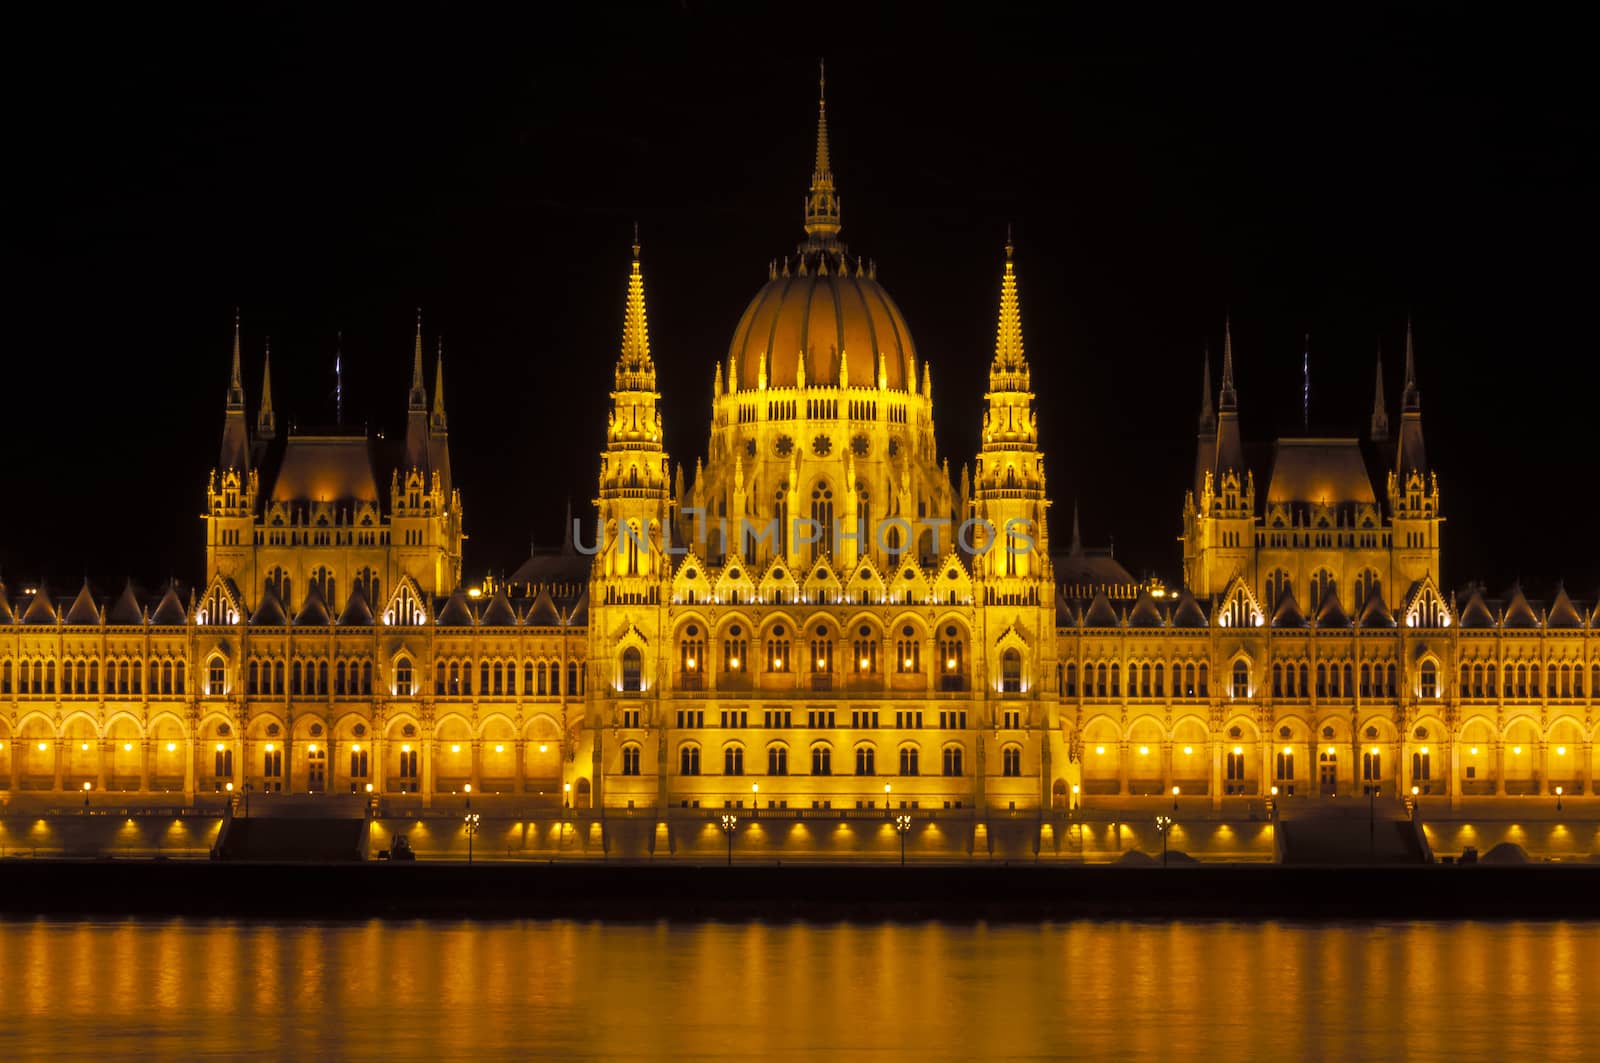 View of the Hungarian Parliament building at night, Budapest.